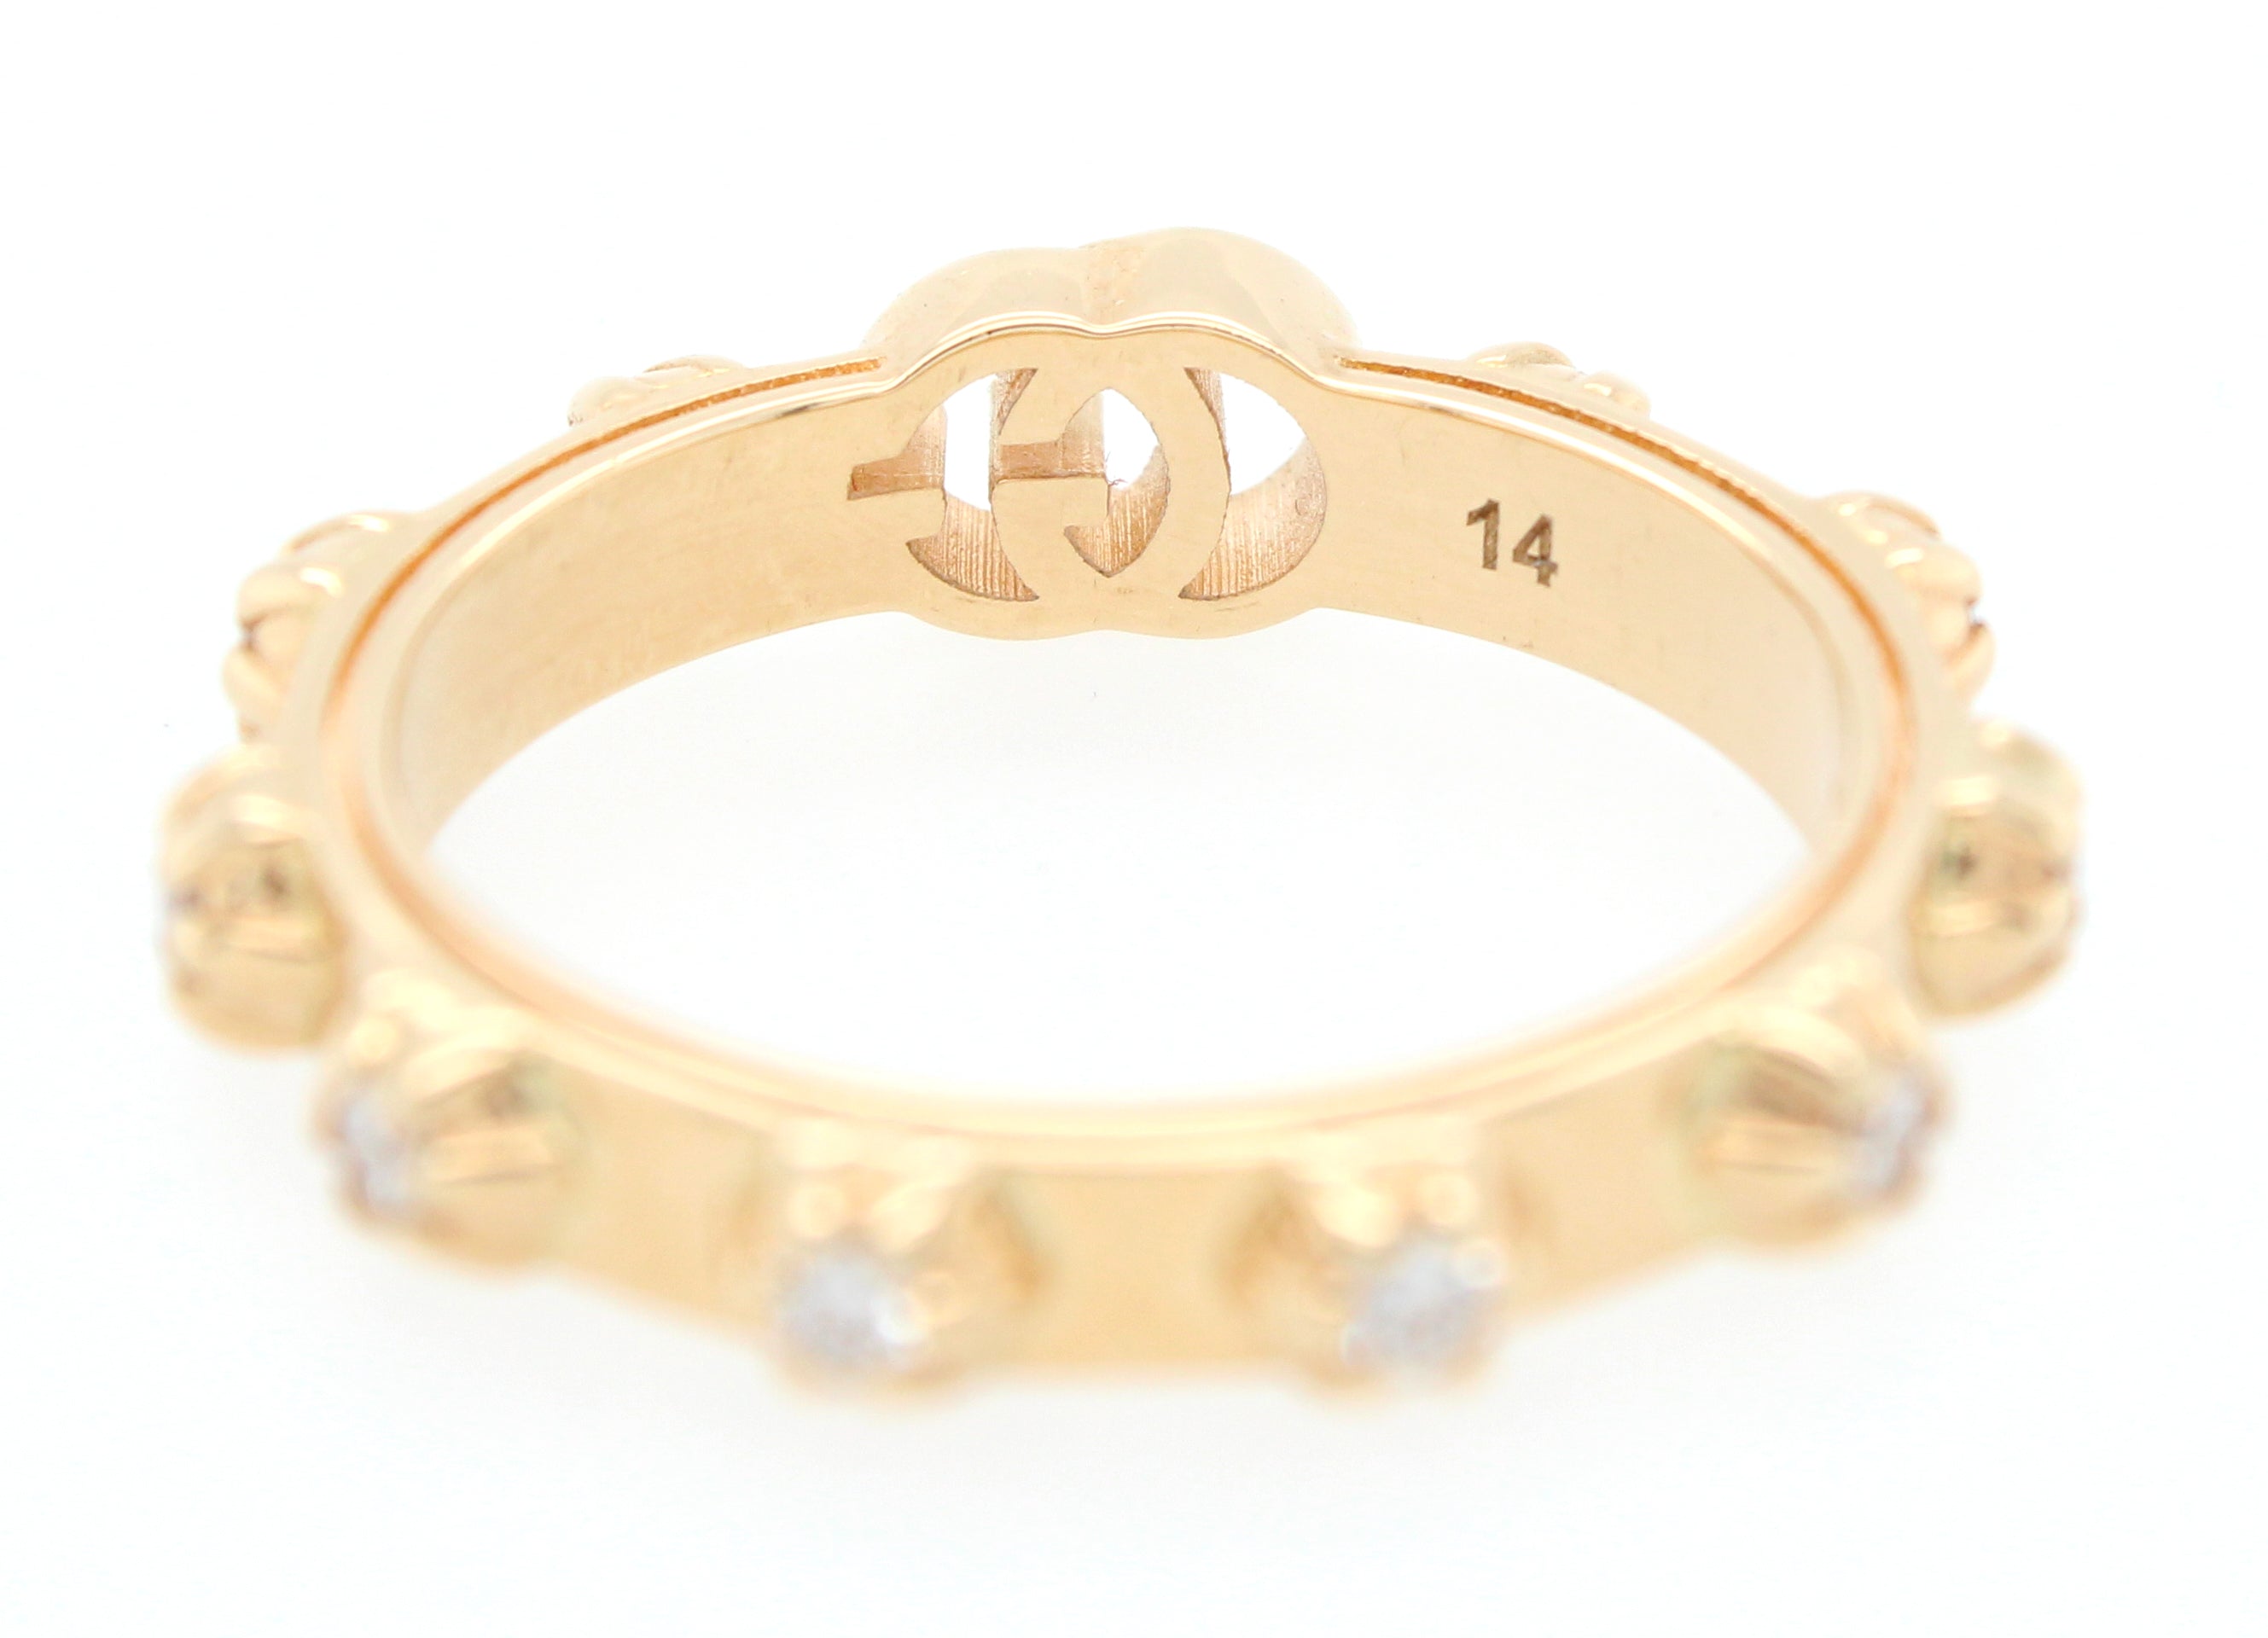 Gucci 0.50ctw Diamond GG Band Ring in 18k Yellow Gold | Size 14